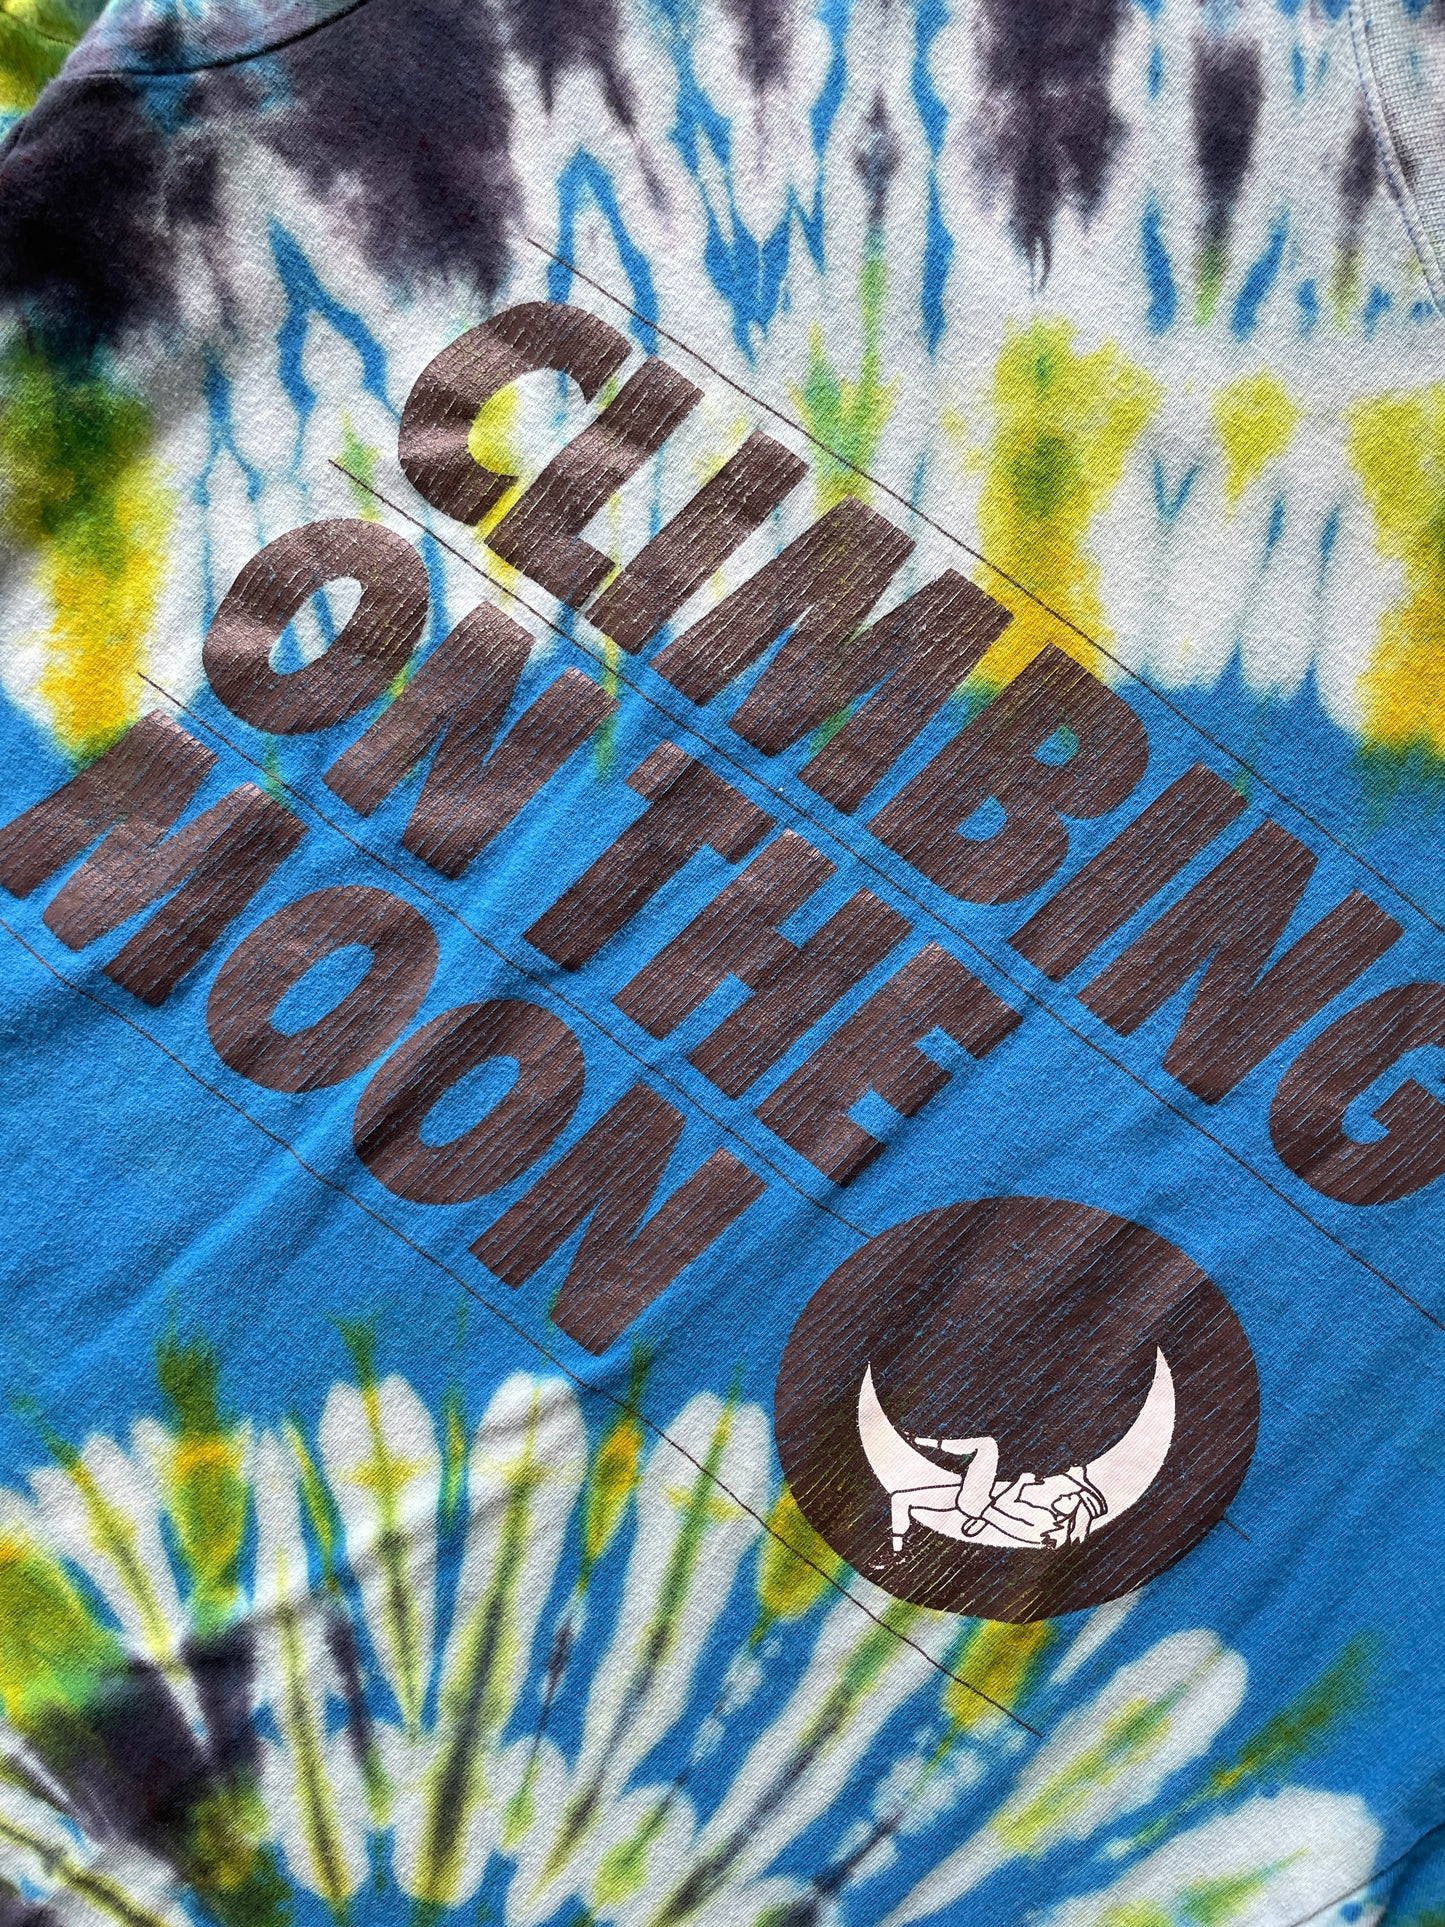 M/L Men’s La Sportiva Climbing On the Moon Handmade Tie Dye V-Neck T-Shirt | One-Of-a-Kind Blue and Green Short Sleeve